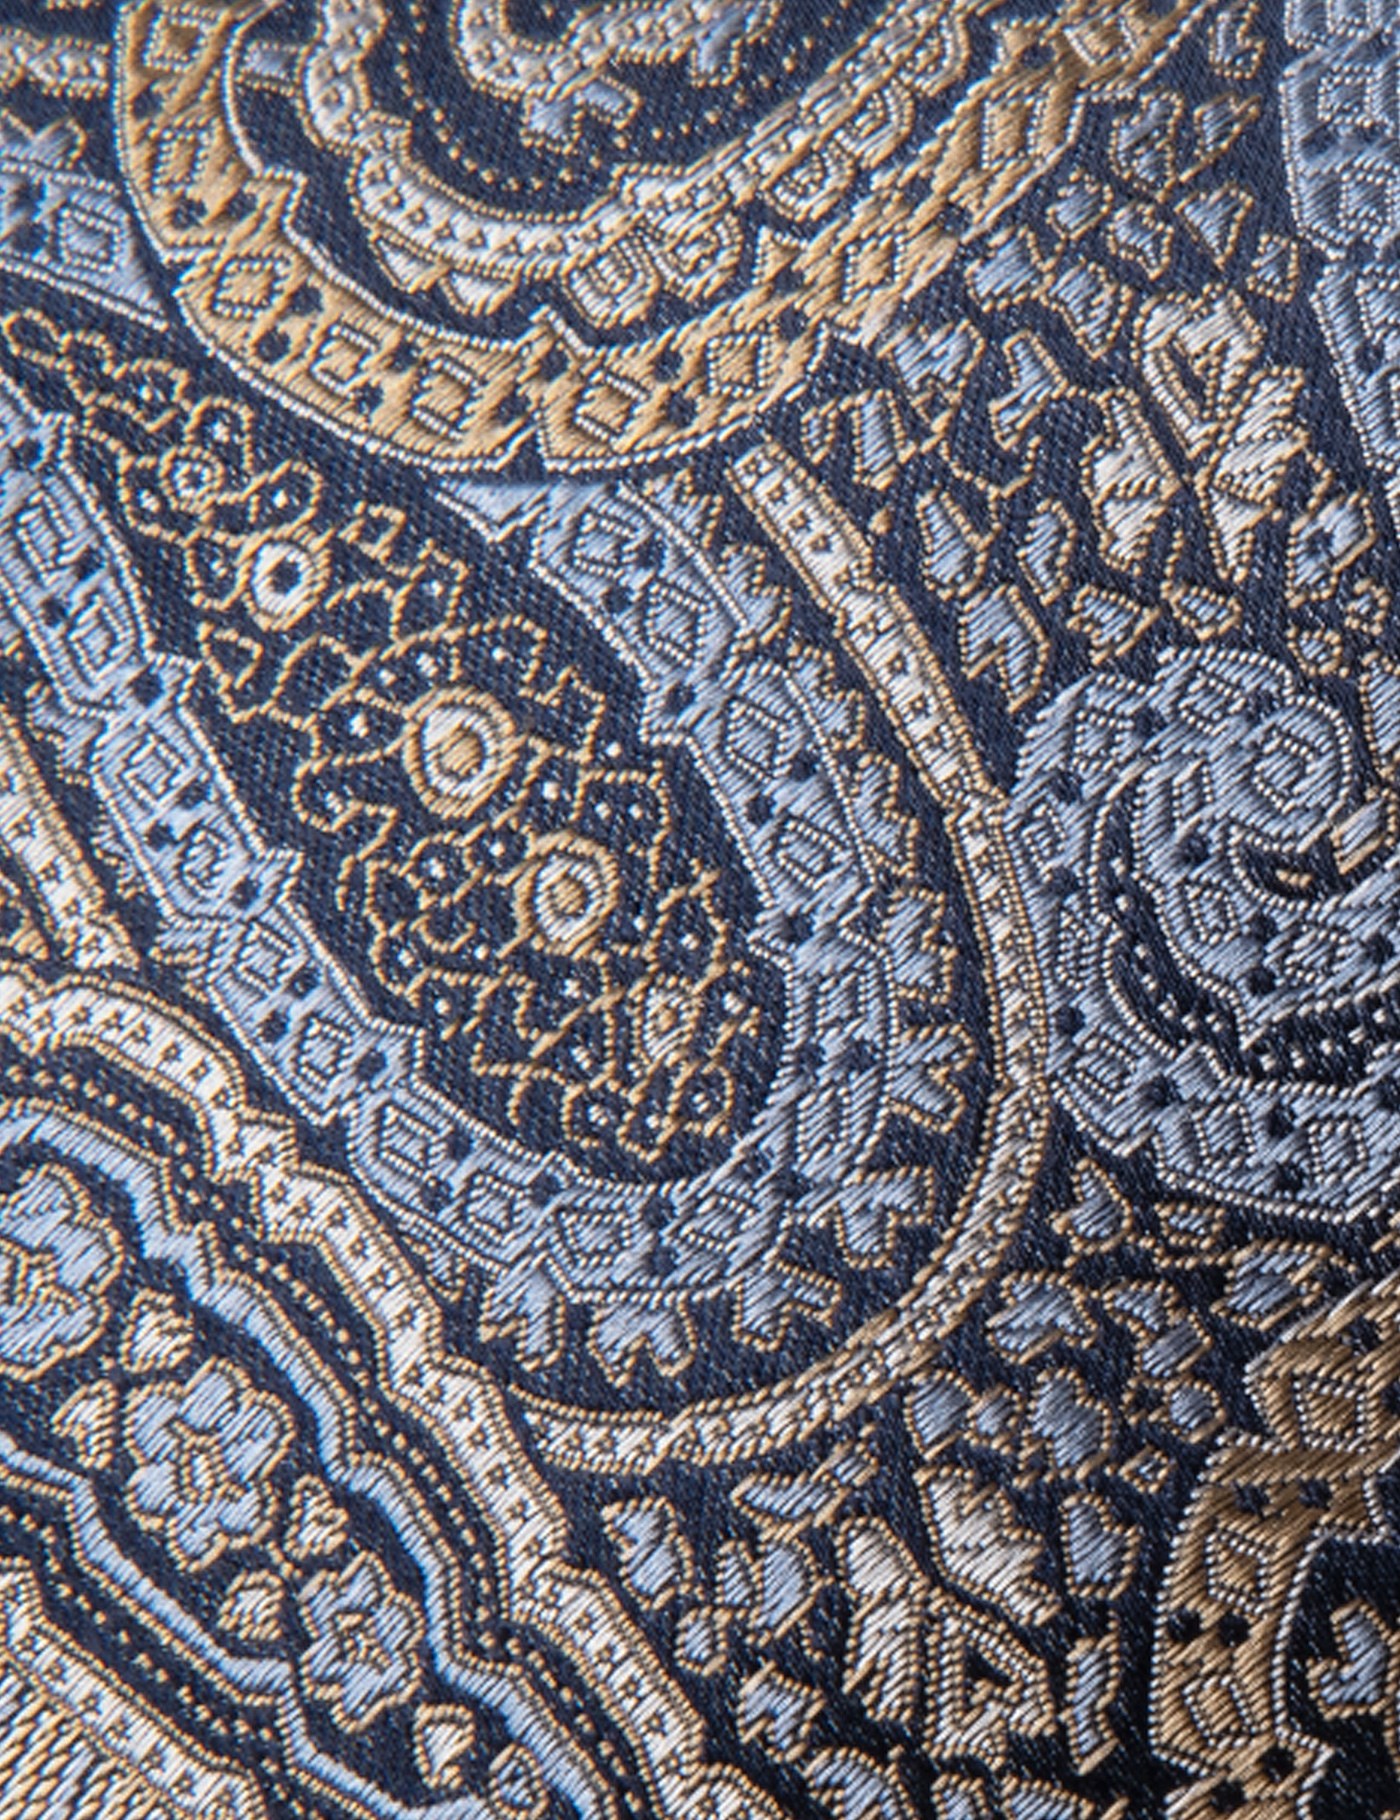 Men's Brown Bold Paisley Tie - 100% Silk | Hawes and Curtis